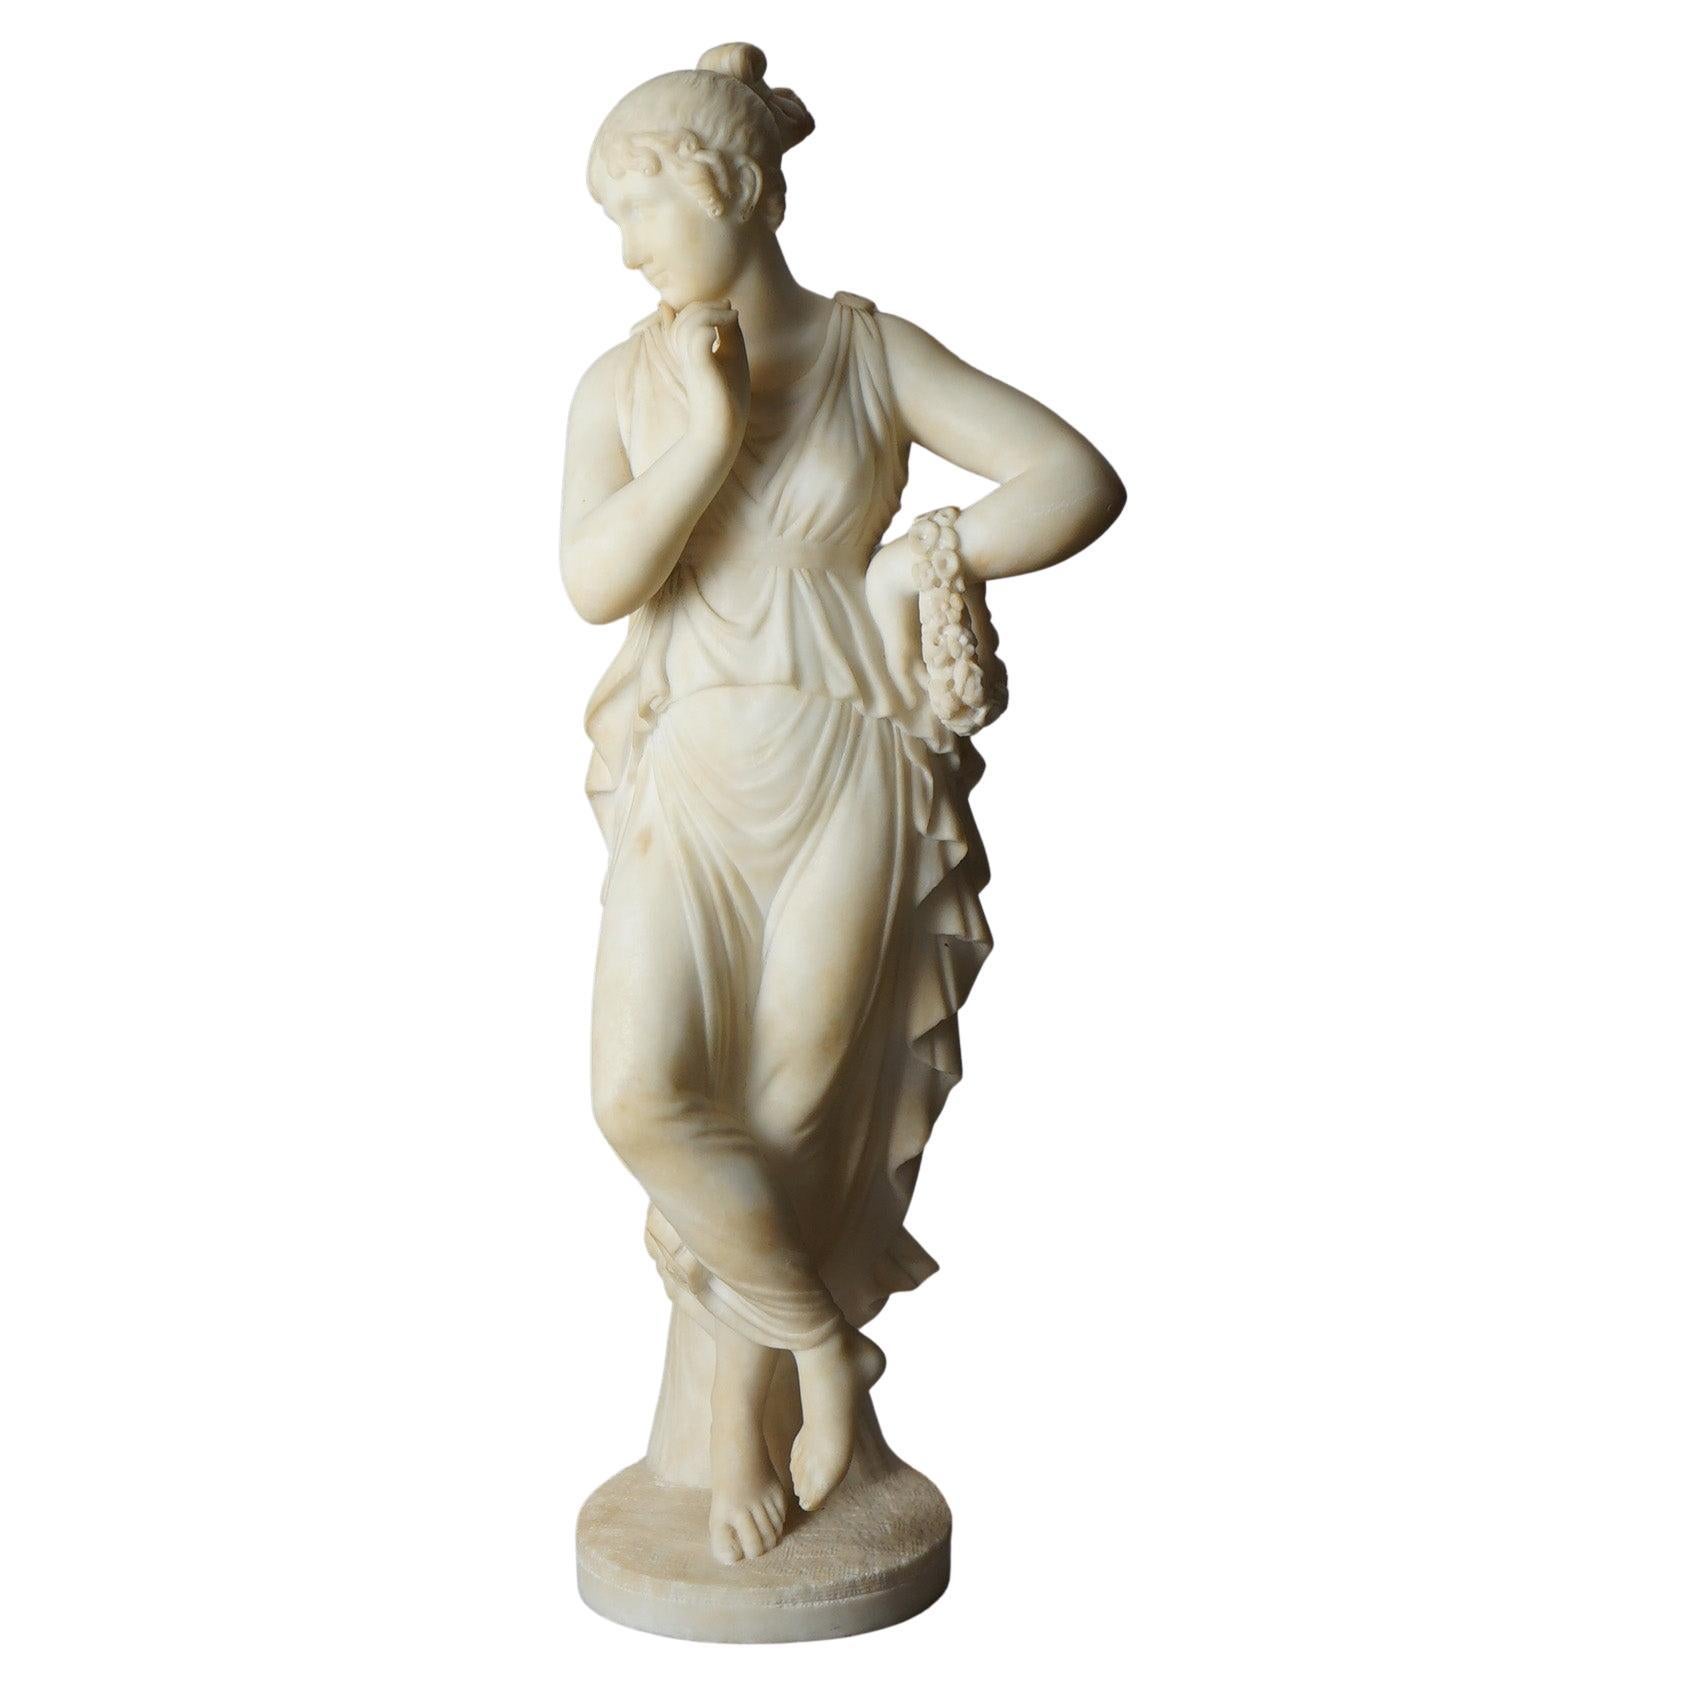  Antique Classical Alabaster Sculpture of a Woman by P. Bazzanti, Florence 19thC